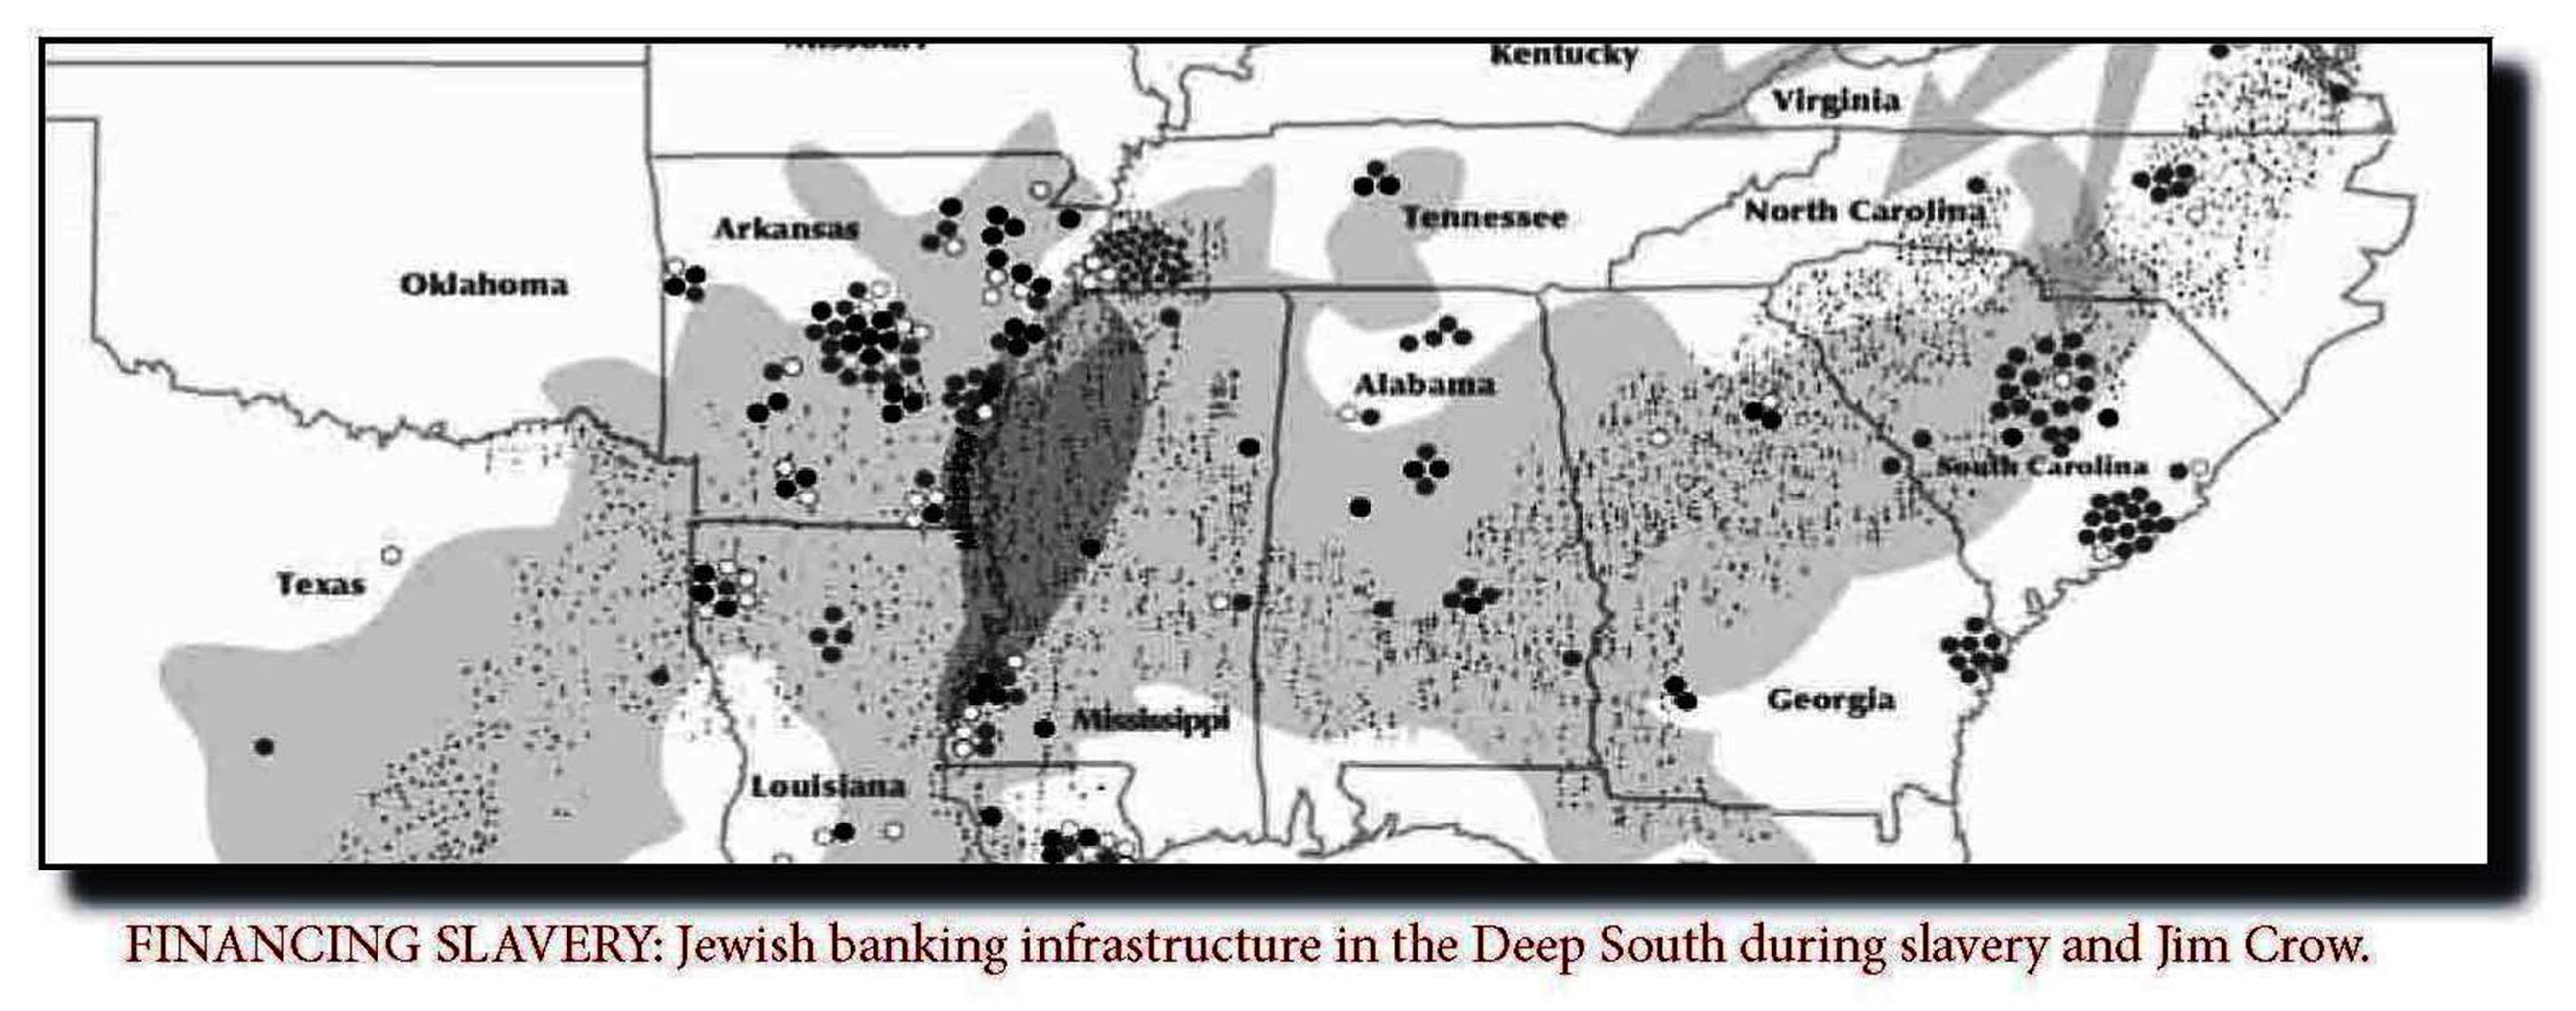 Financing Slavery- Jewish Banking infrastructure during slavery and Jim Crow